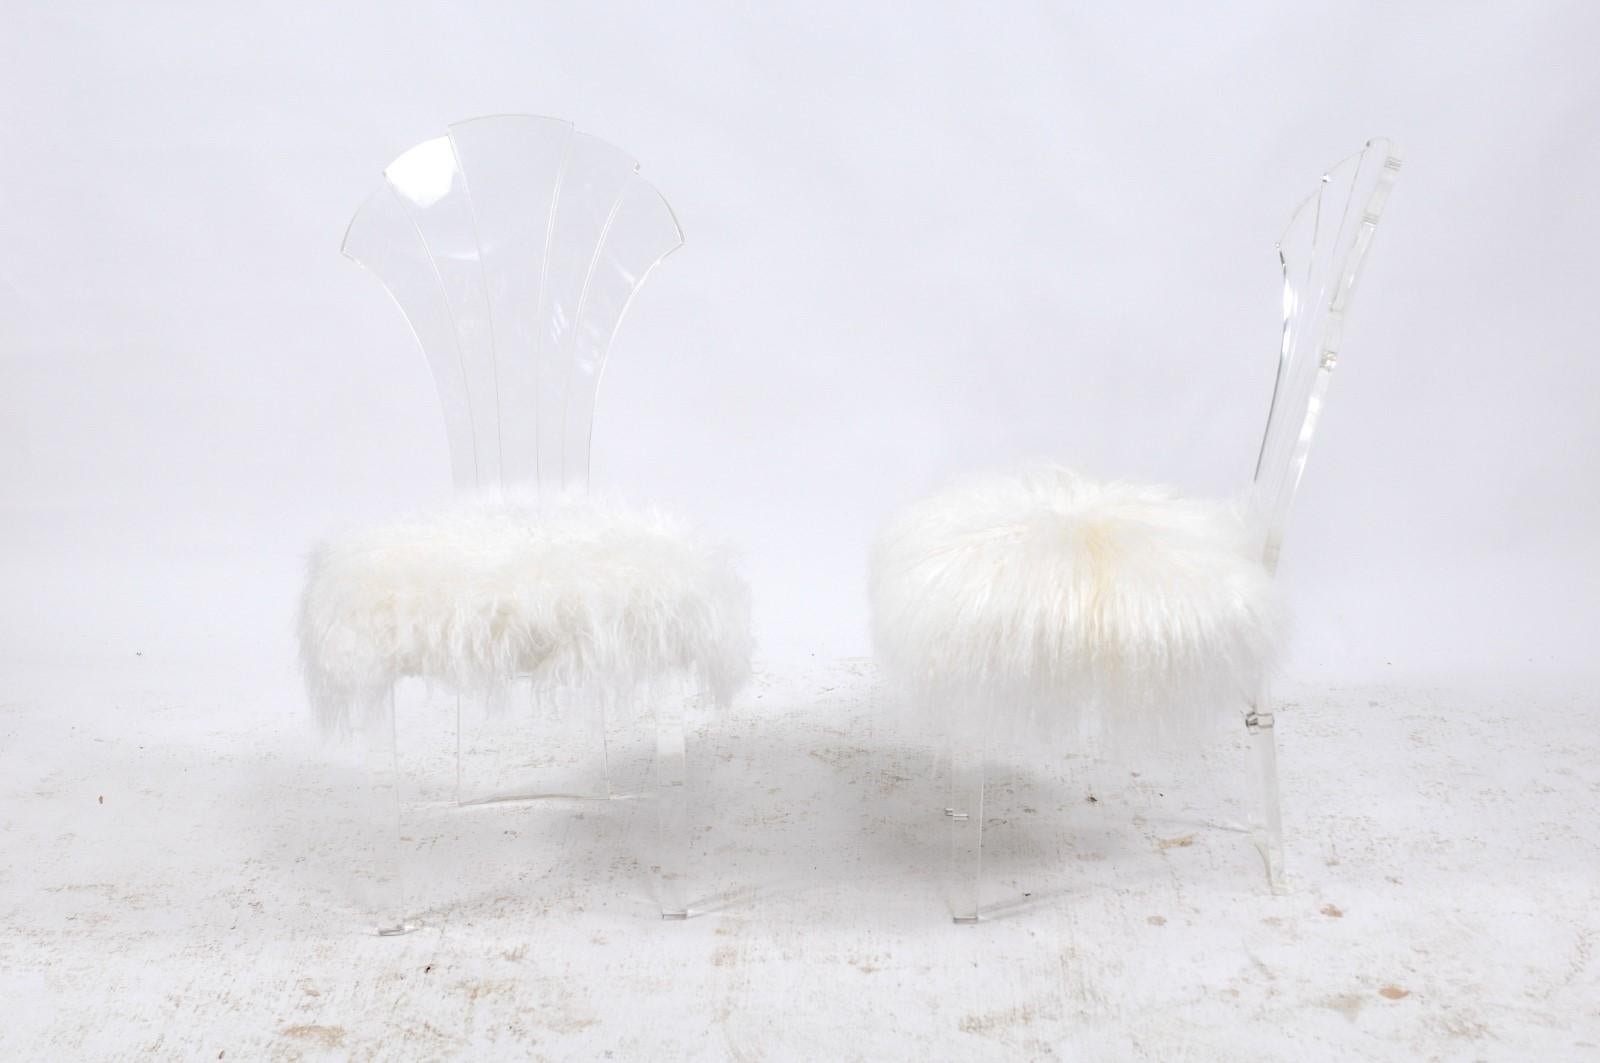 Two Italian vintage Lucite chairs from the mid-20th century with Mongolian fur upholstery and scalloped backs, price and sold individually. These vintage Mid-Century Modern Italian Lucite chairs are as sturdy and comfortable as they are cheeky and